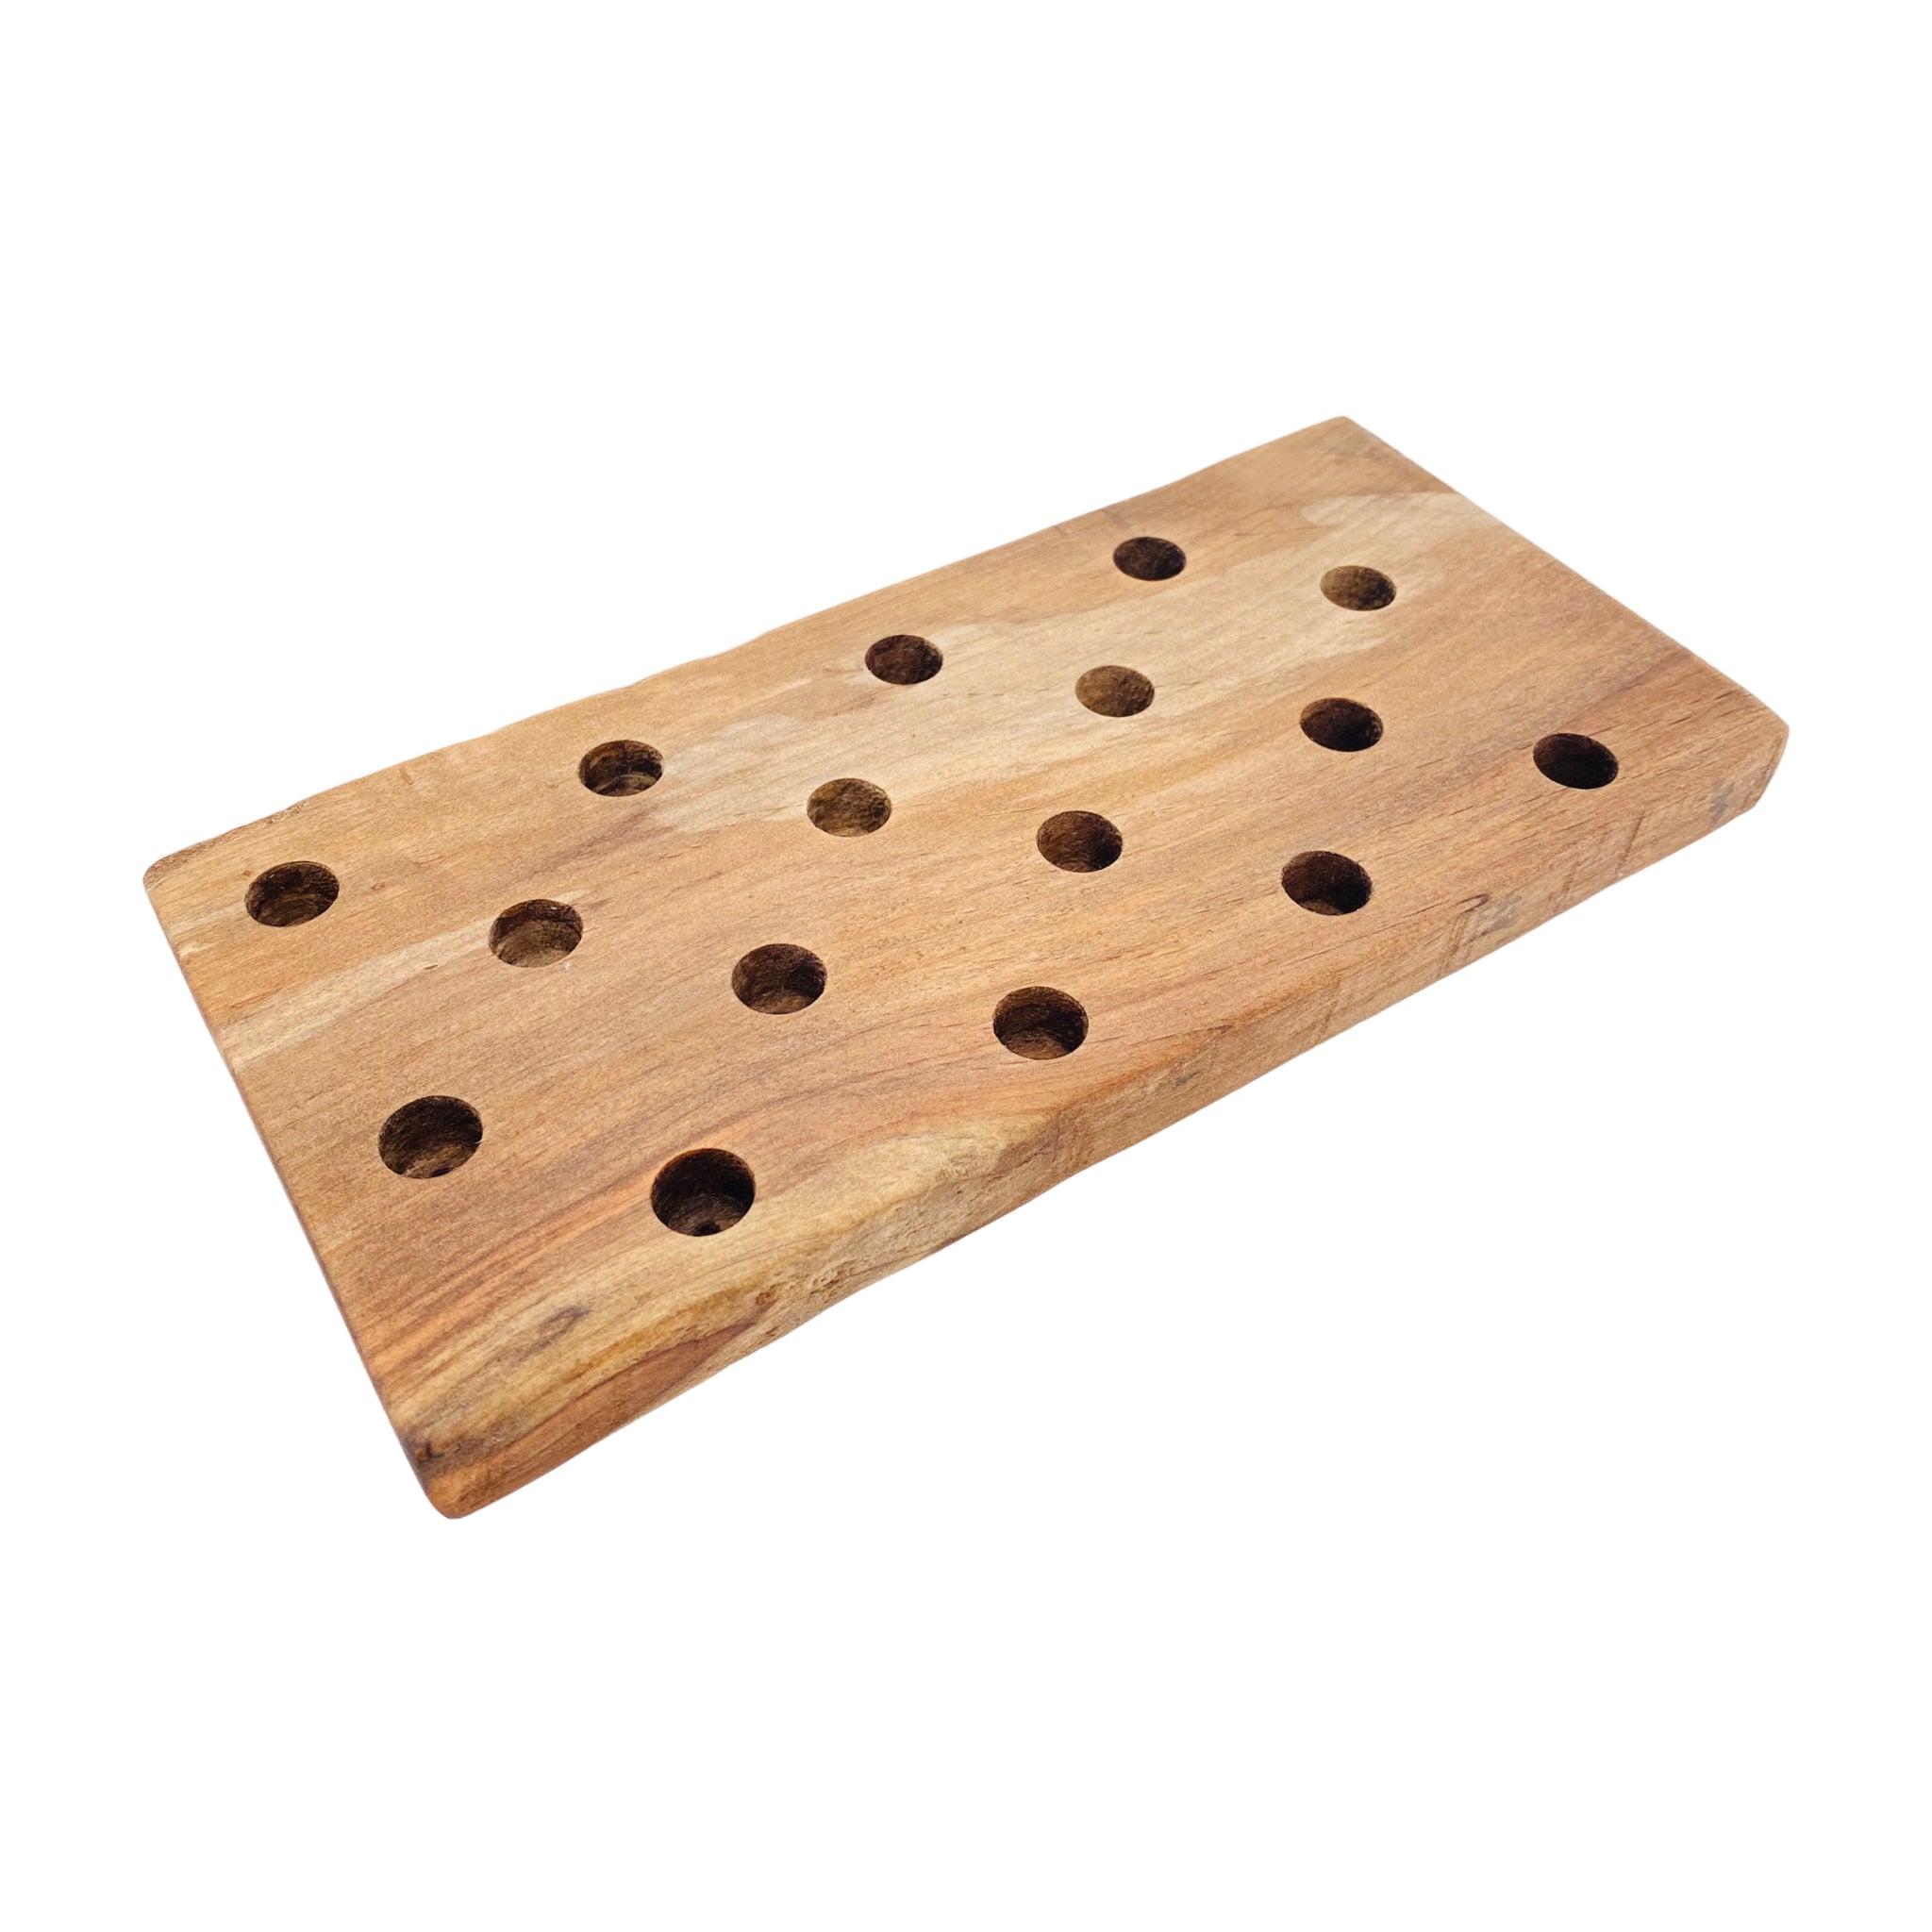 16 Hole Wood Display Stand Holder For 14mm Bong Bowl Pieces Or Quartz Bangers - Drift Wood